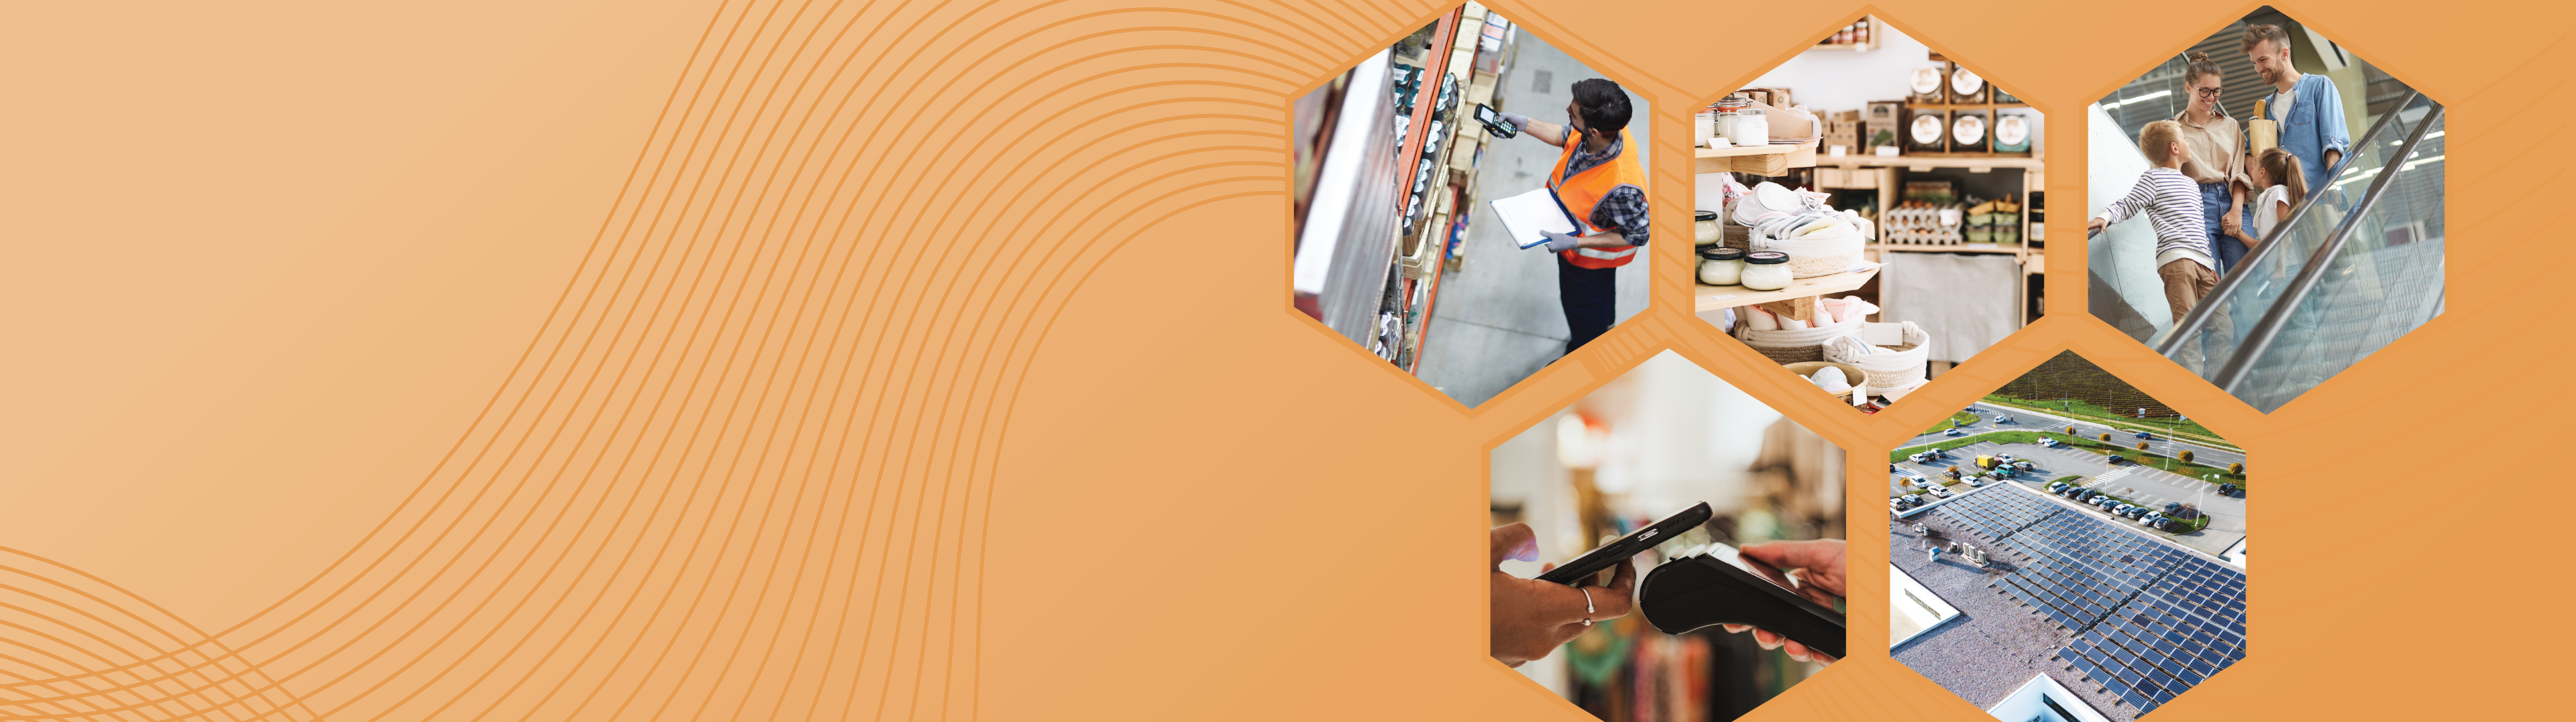 Retail transition pathway carousel banner with orange background and five images of retail situations in hexagonal shapes to the right